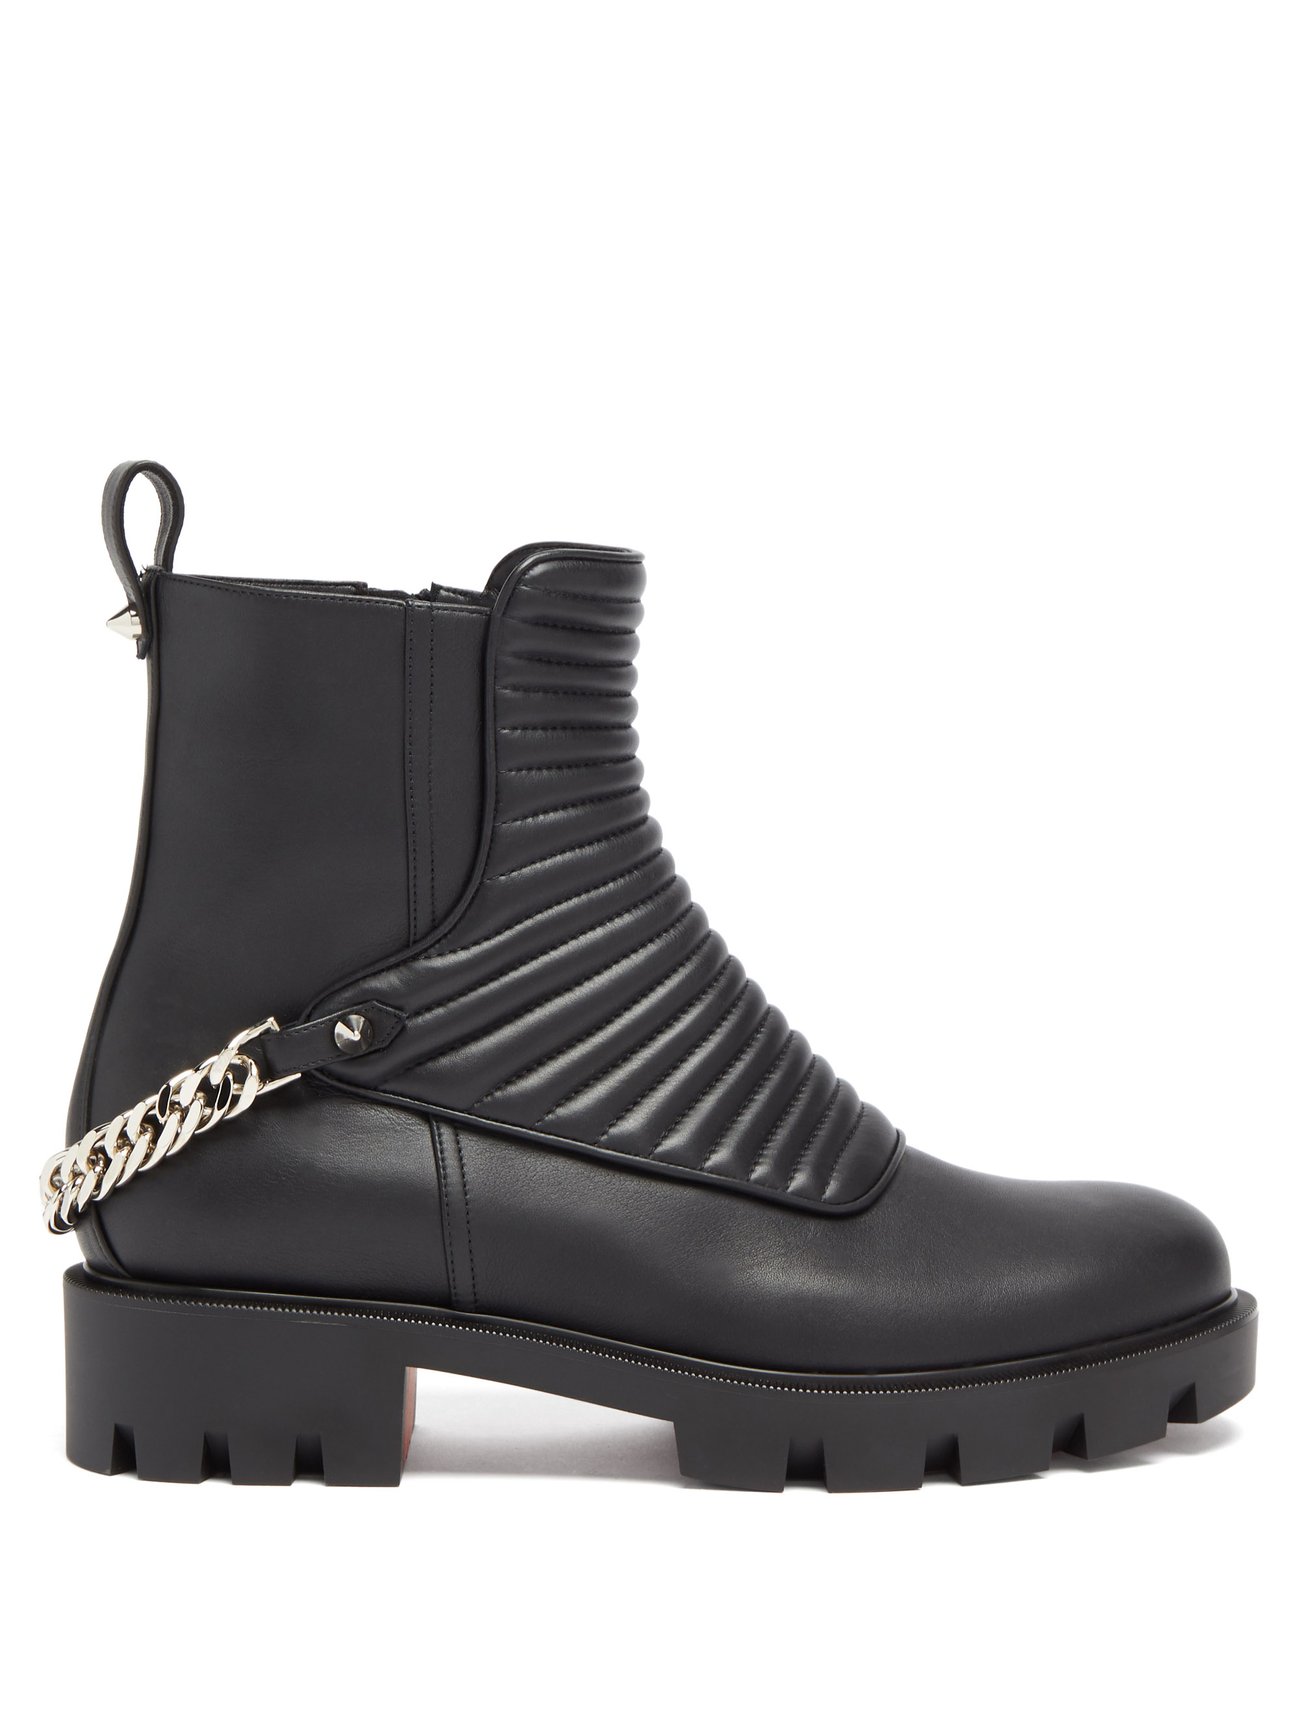 Christian Louboutin Chain-Midsole Red Sole Ankle Boot  Christian louboutin  boots, Christian louboutin shoes, Boots